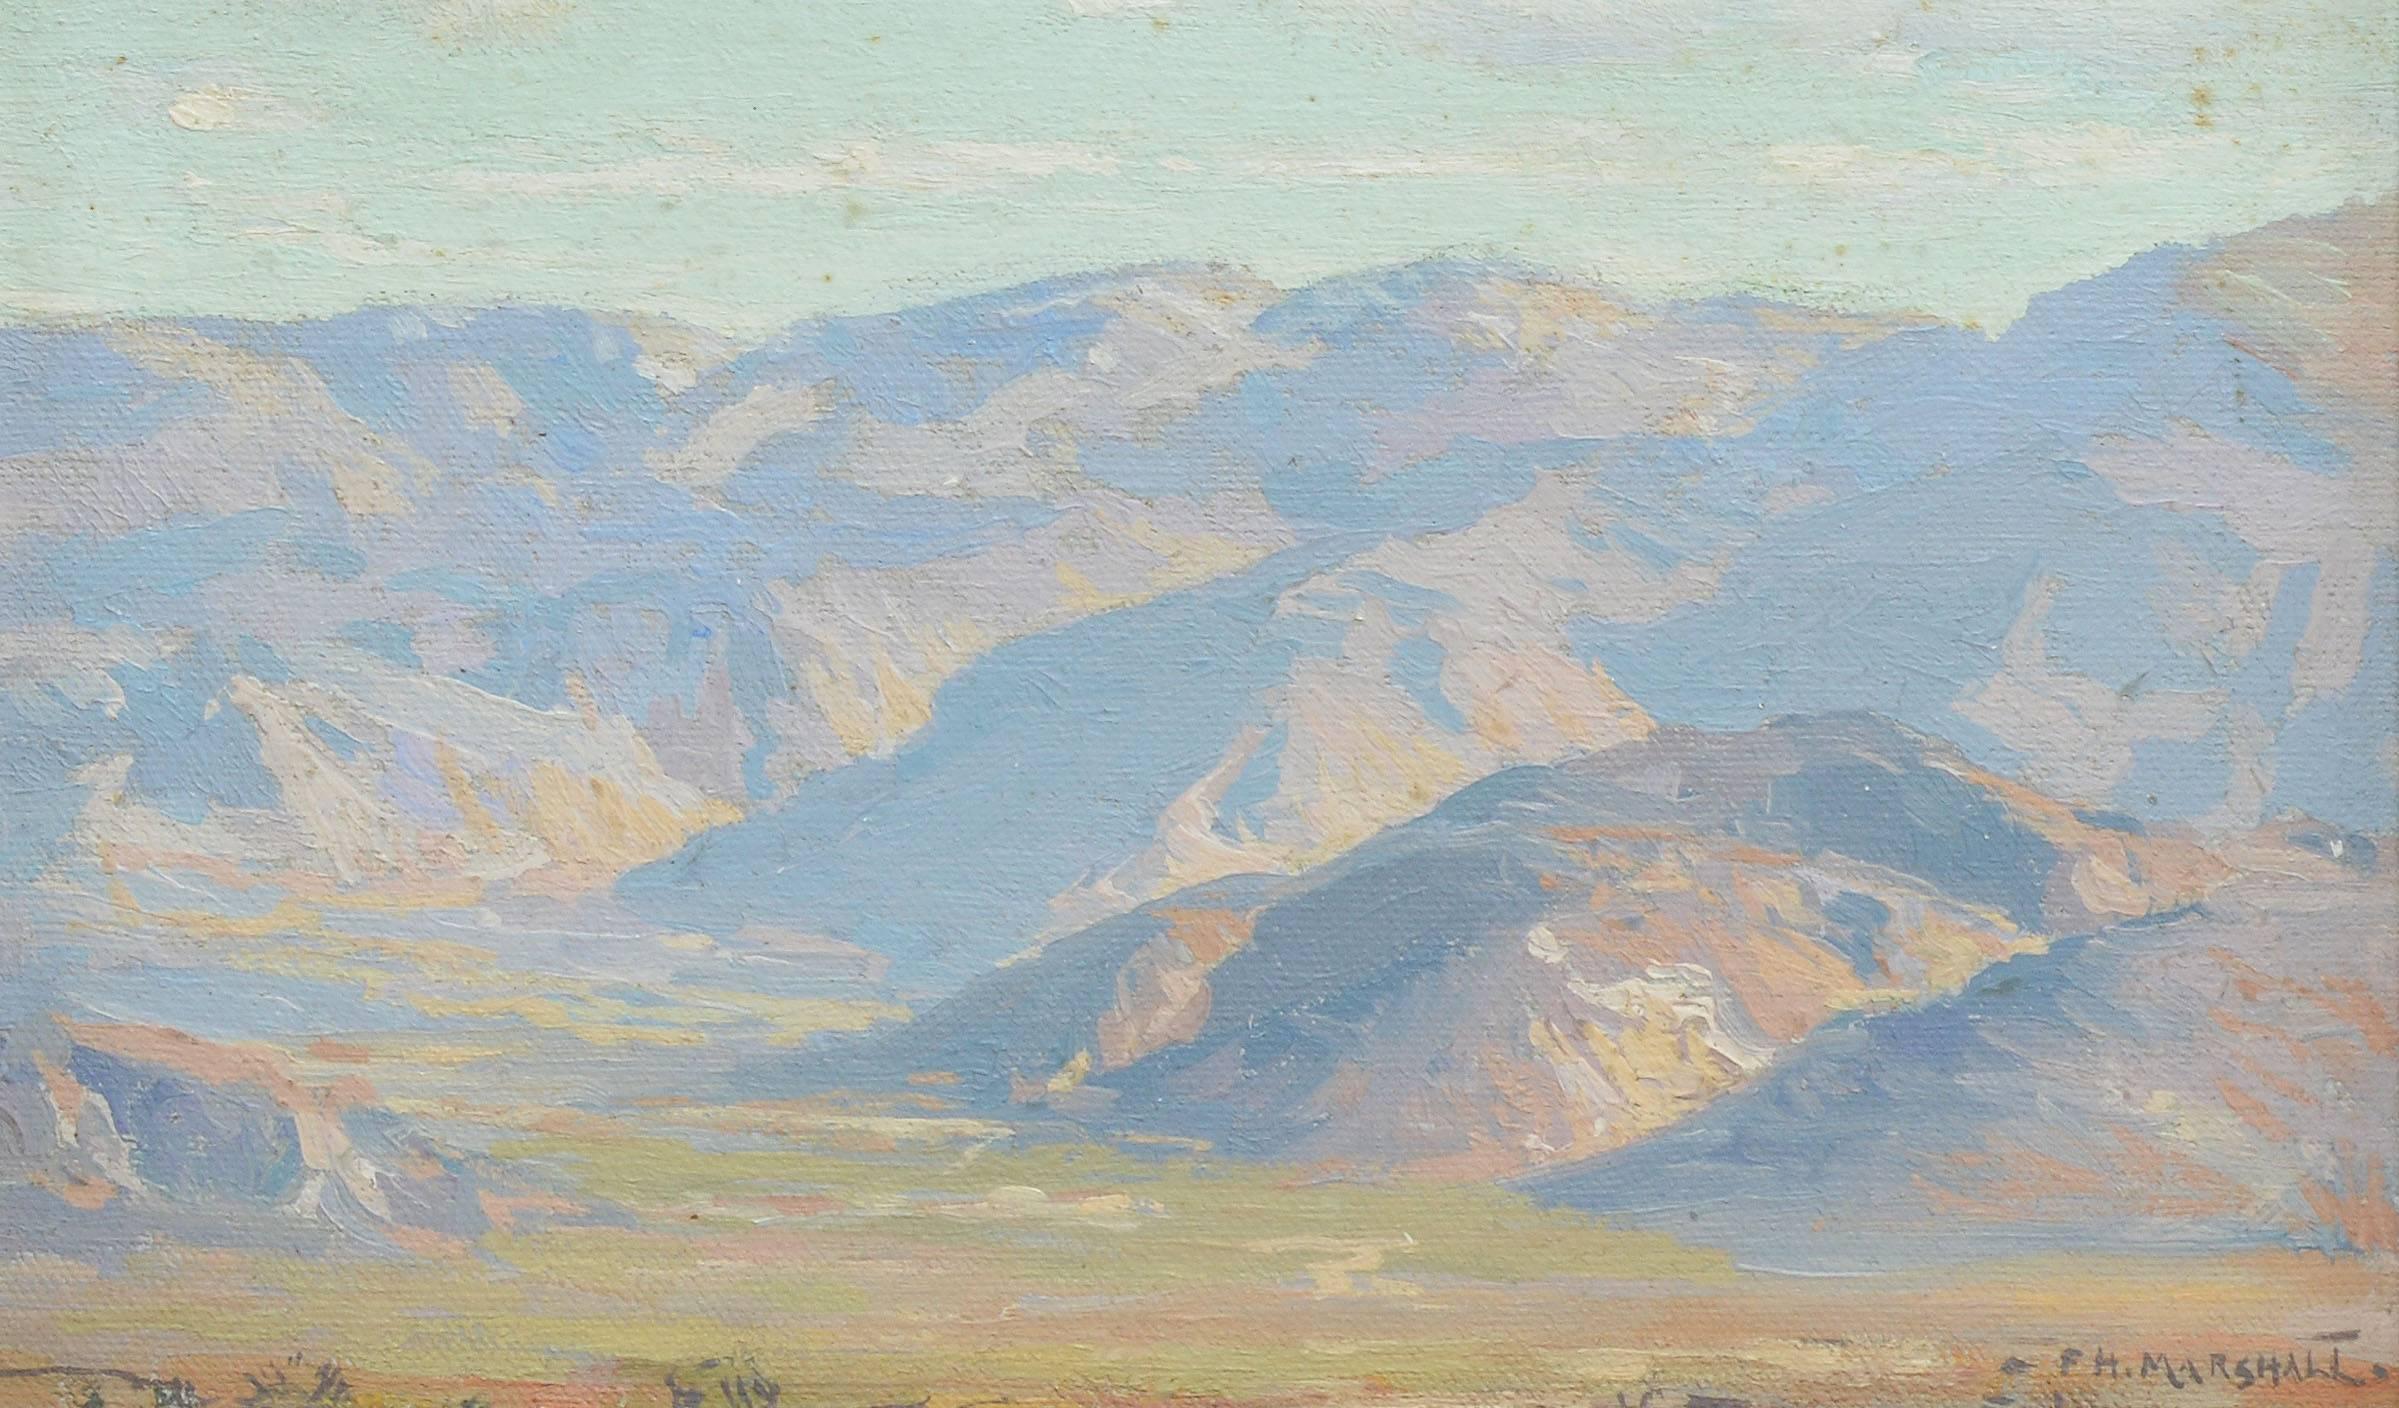 Impressionist landscape of Banning Canyon, California by Frank Howard Marshall (1866-1945).  Oil on board, circa 1910.  Signed lower right, "F. H. Marshall".  Displayed in a white wood frame.  Image size, 10"L x 8"H, overall